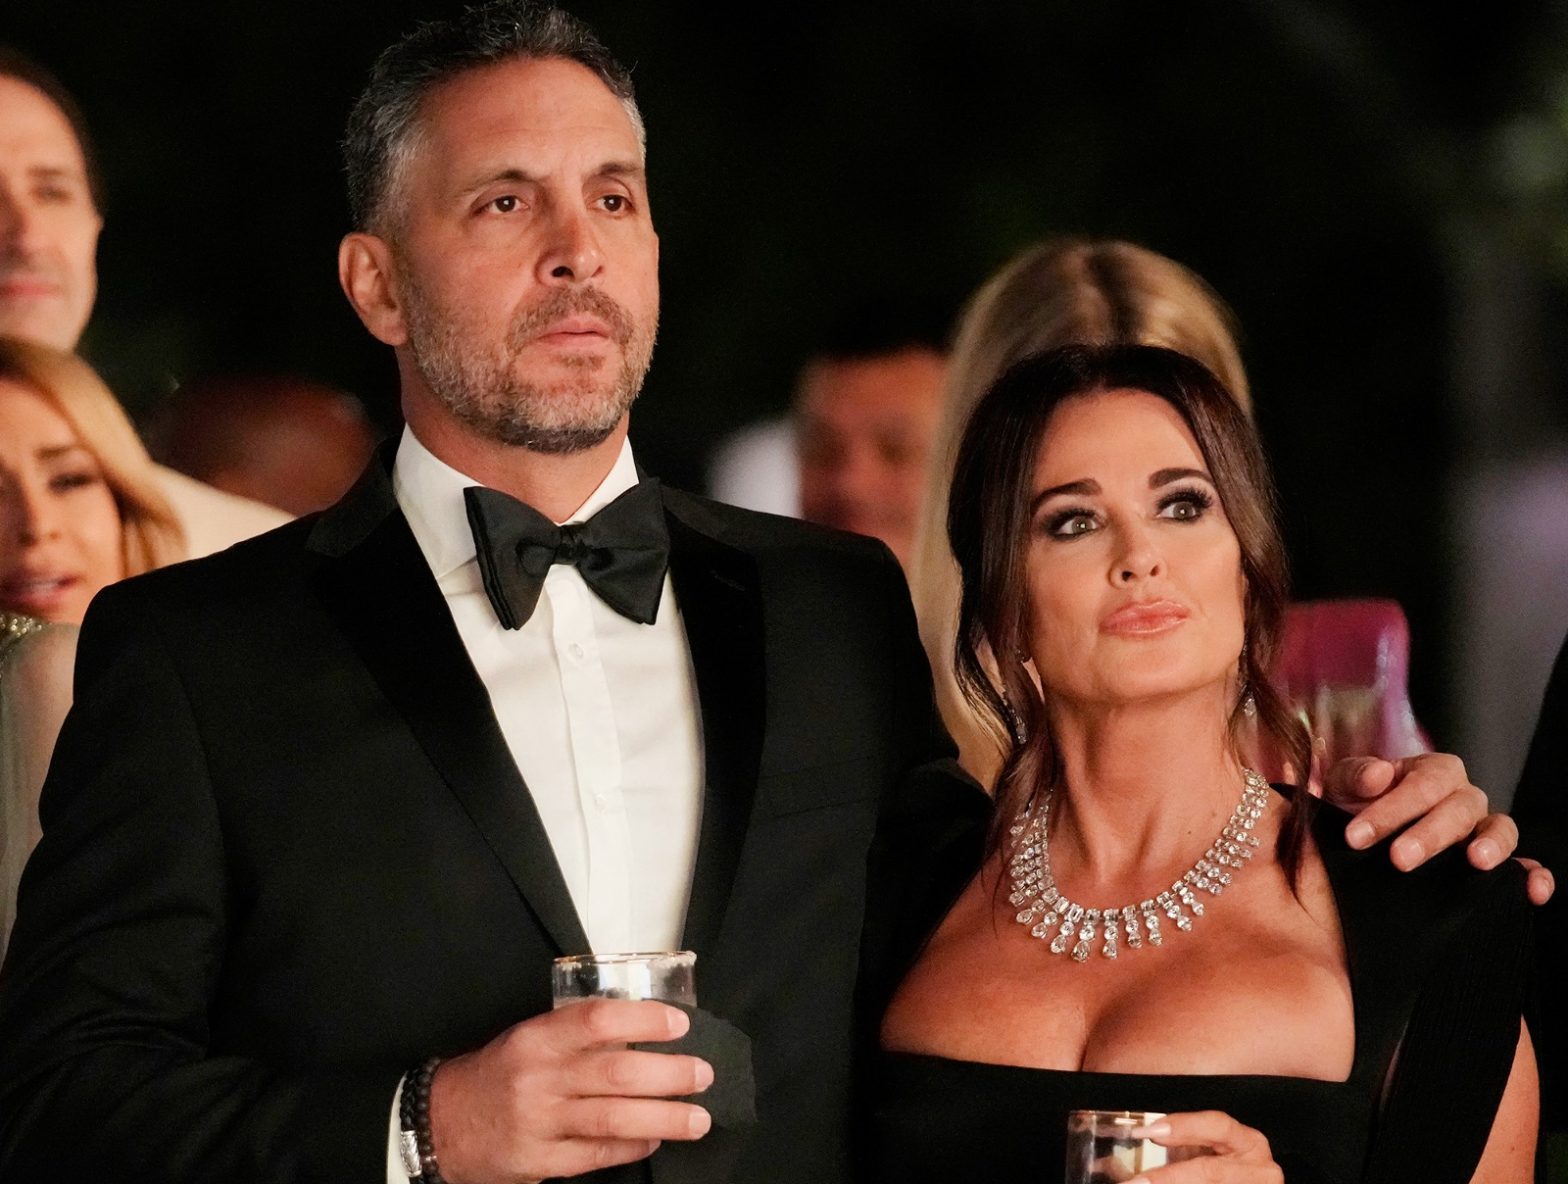 Did Kyle Richards cheat on Mauricio Umansky with Morgan Wade, fans speculate